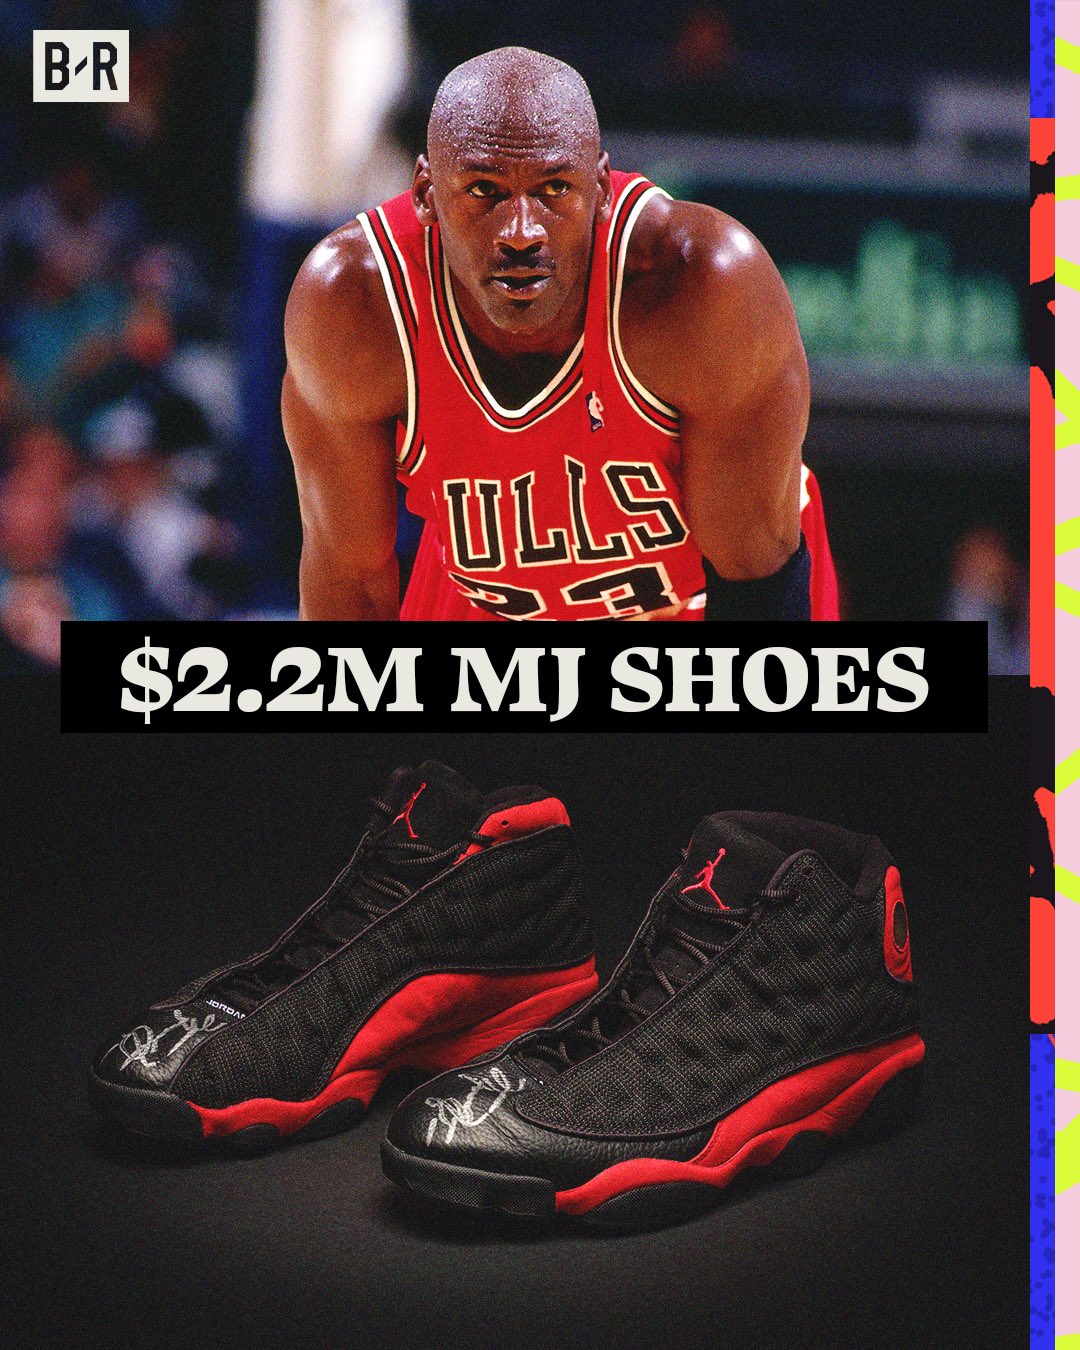 B/R Kicks on X: "MJ's 1998 NBA Finals Jordan 13s just sold for $2.2M. MOST  EXPENSIVE PAIR OF SNEAKS SOLD EVER 🤯 https://t.co/s1jA5HUh1q" / X